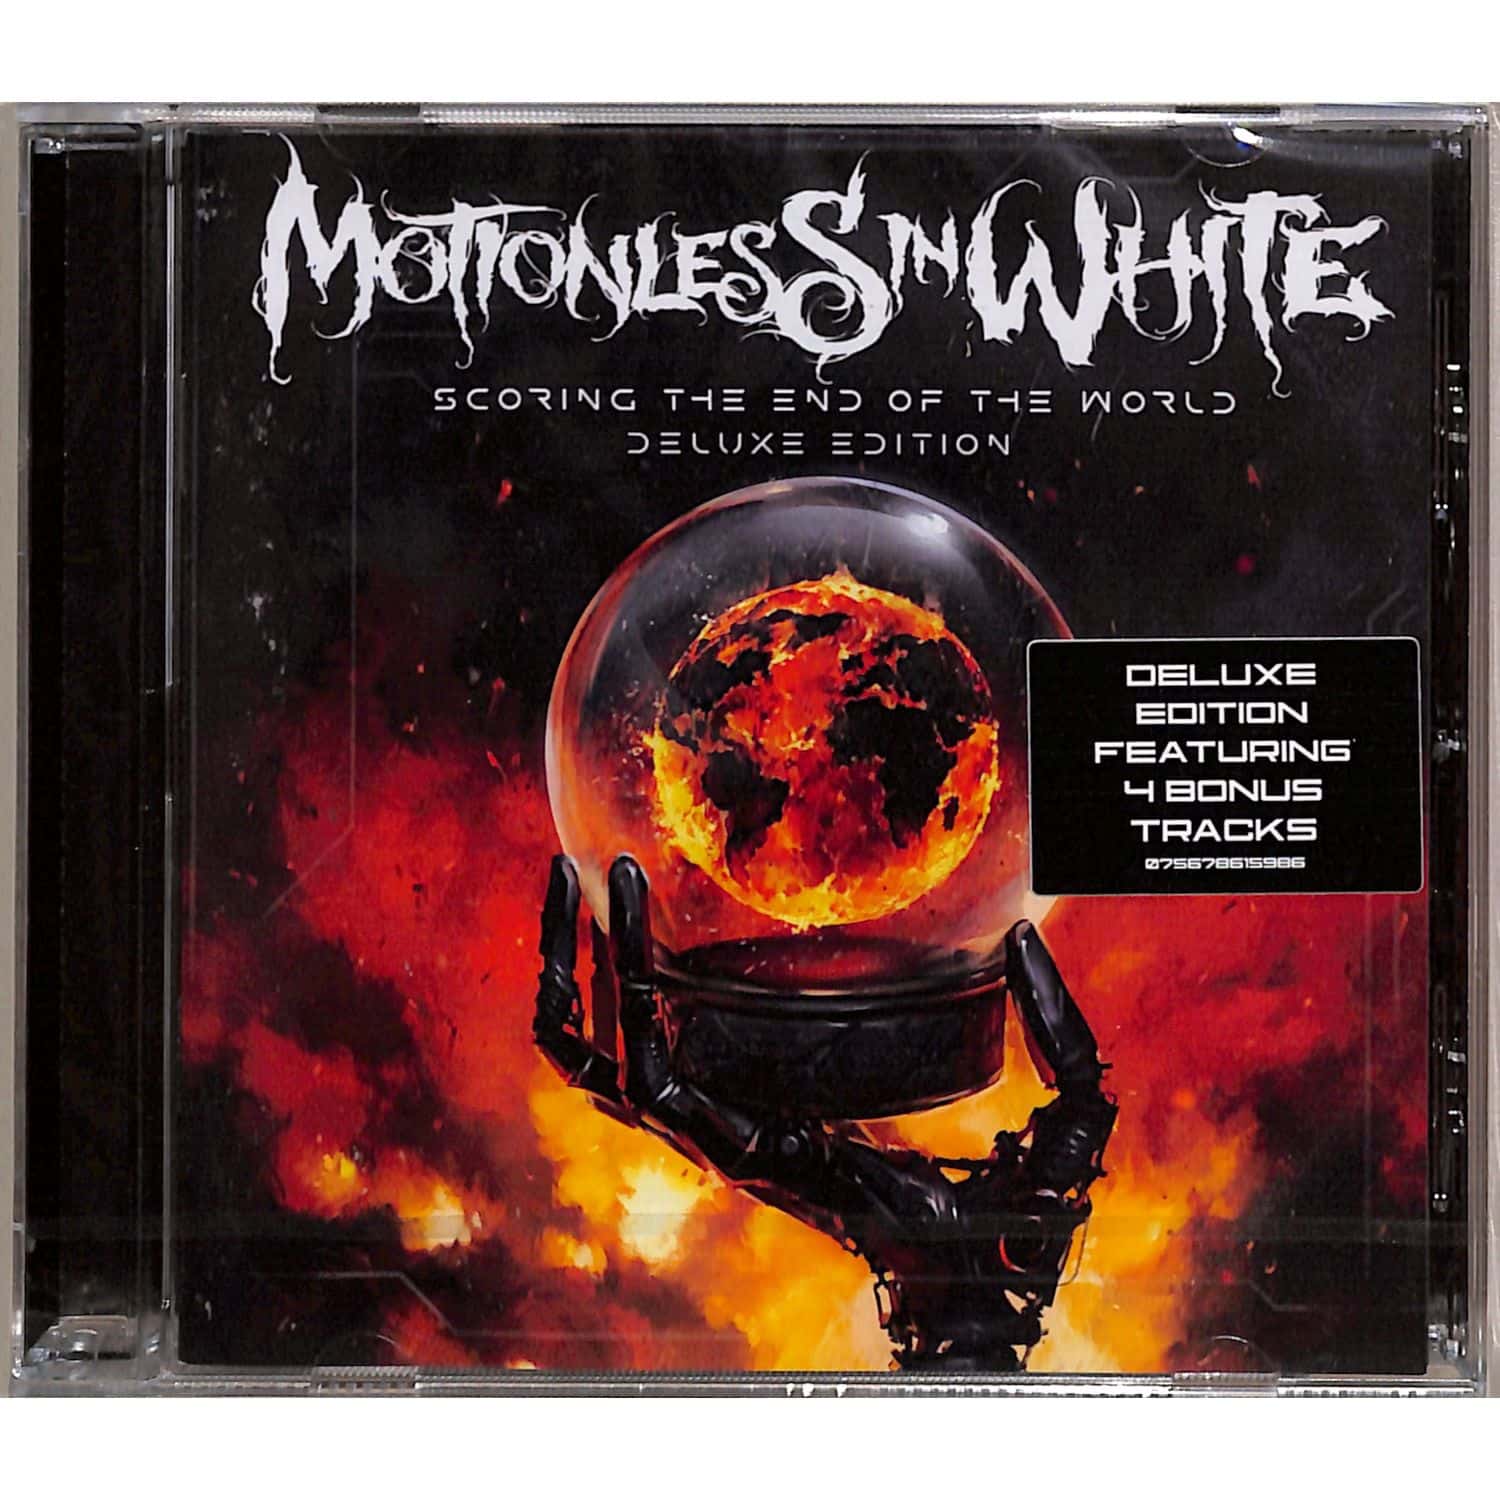 Motionless In White - SCORING THE END OF THE WORLD 